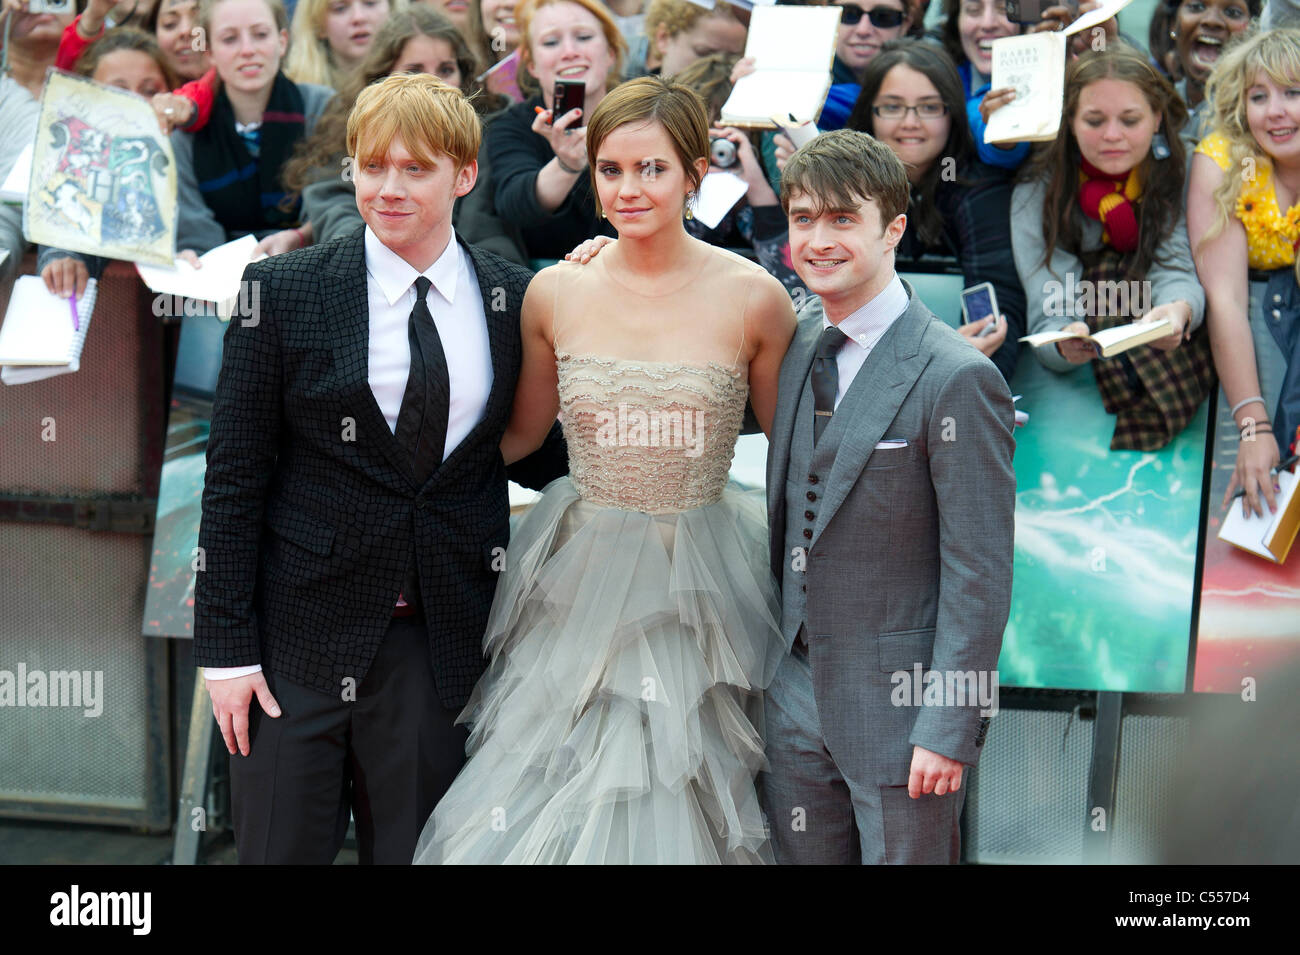 Rupert Grint, Emma Watson and Daniel Radcliffe "Harry Potter and the Deathly Hallows: Part 2" World Premiere - Arrivals Stock Photo